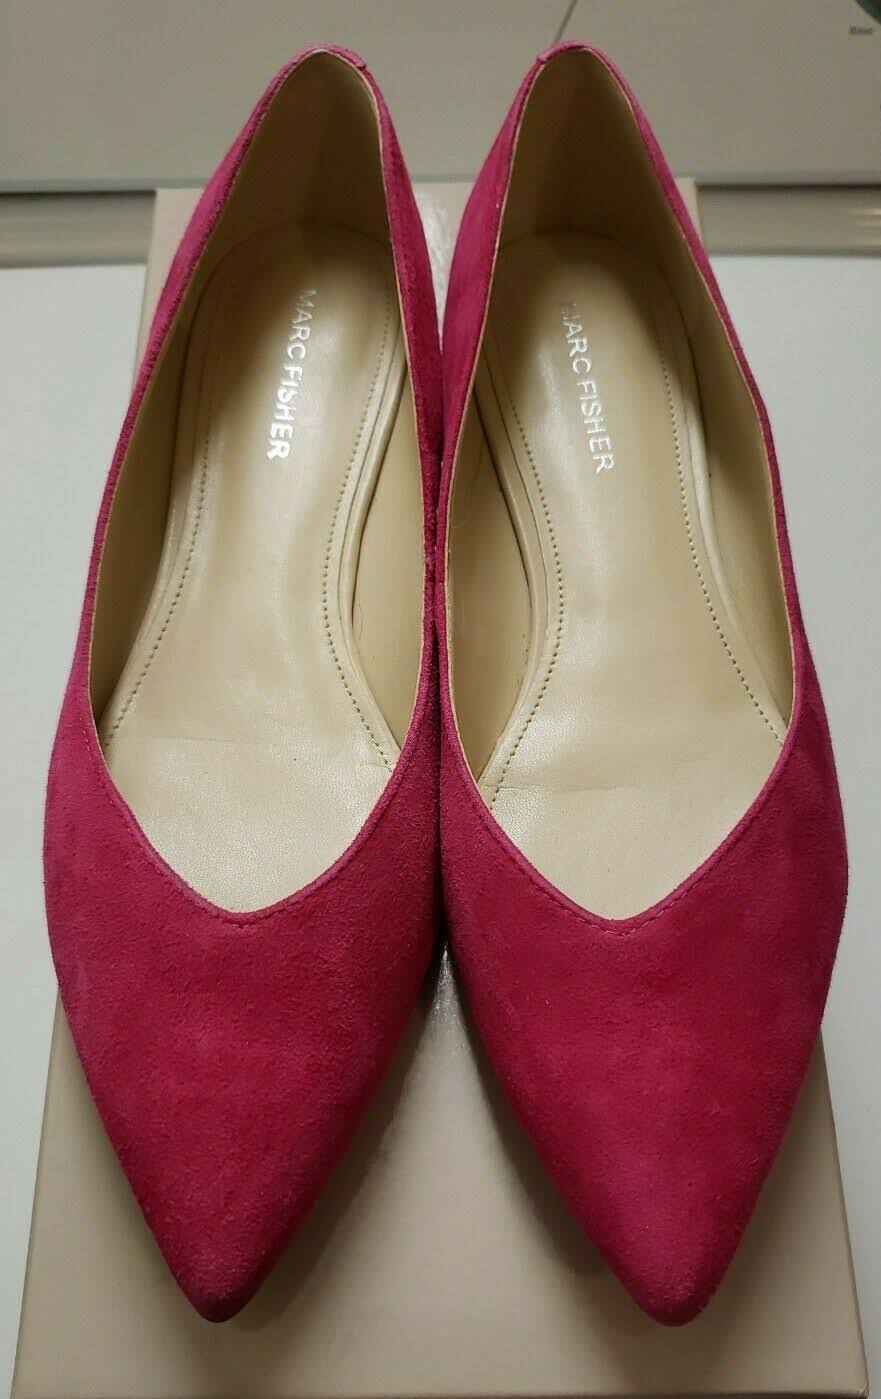 Thrifted Hot Pink Suede Marc Fisher Flats - 8.5